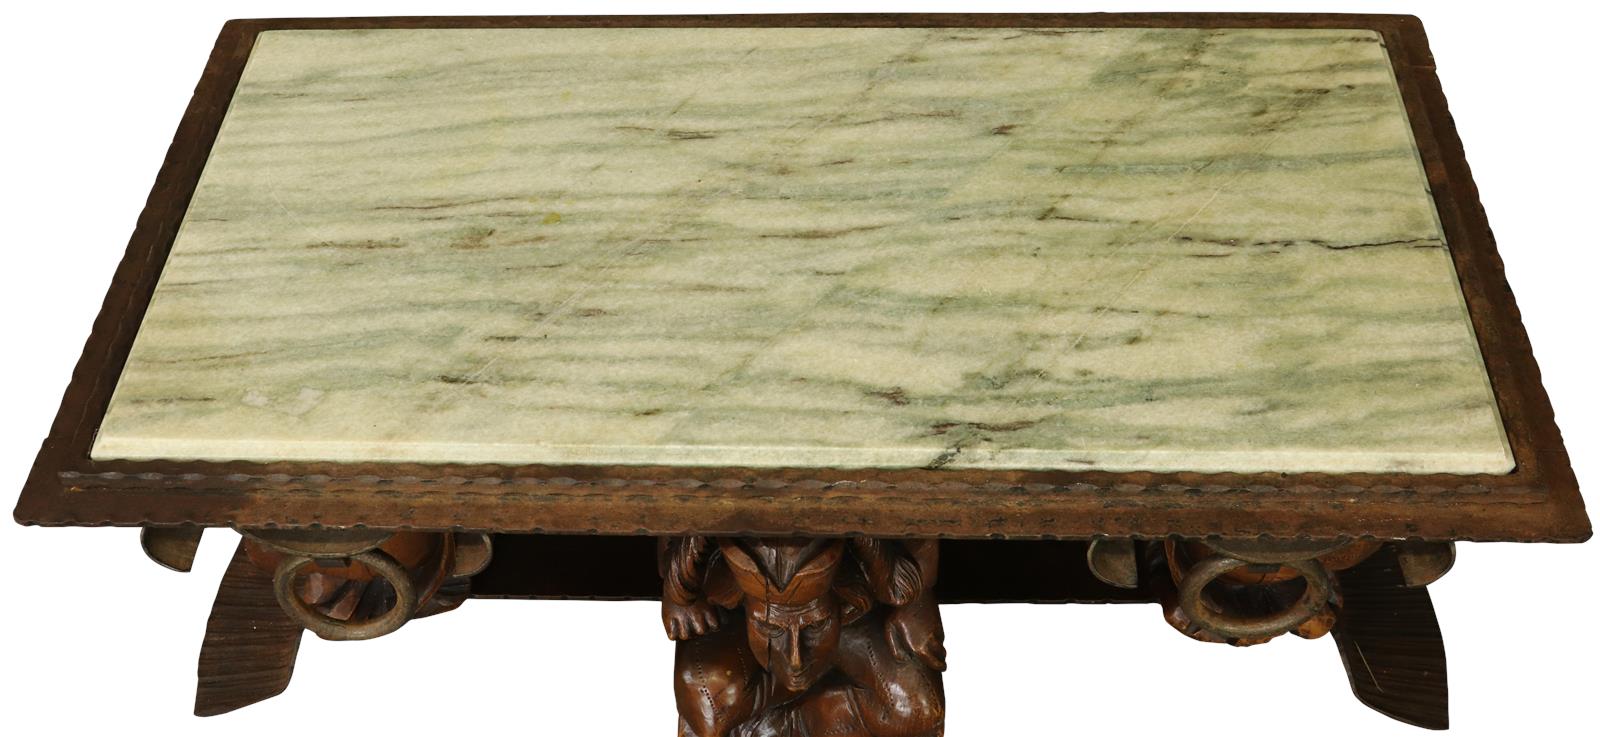 Vintage Coffee Table Courtiers Renaissance Fish Tail Feet Green Marble Iron-Image 2